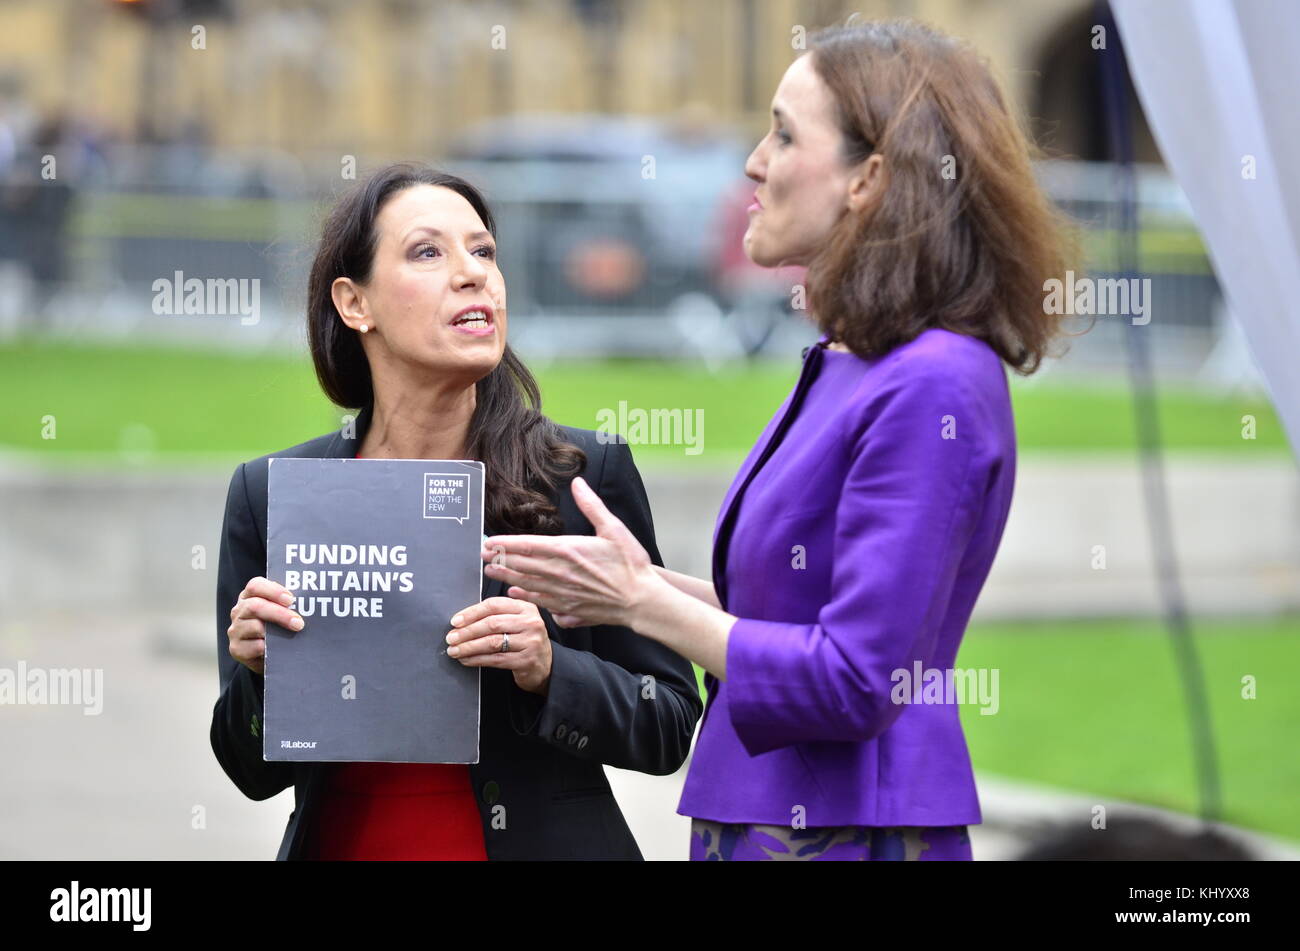 London, UK. 22nd November. Debbie Abrahams MP (Labour; Oldham East and Saddleworth) and Theresa Villiers MP (Con) engage in a lively BBC TV interview on College Green, Westminster shortly before Philip Hammond begins his budget speech in the house. Credit: PjrNews/Alamy Live News Stock Photo